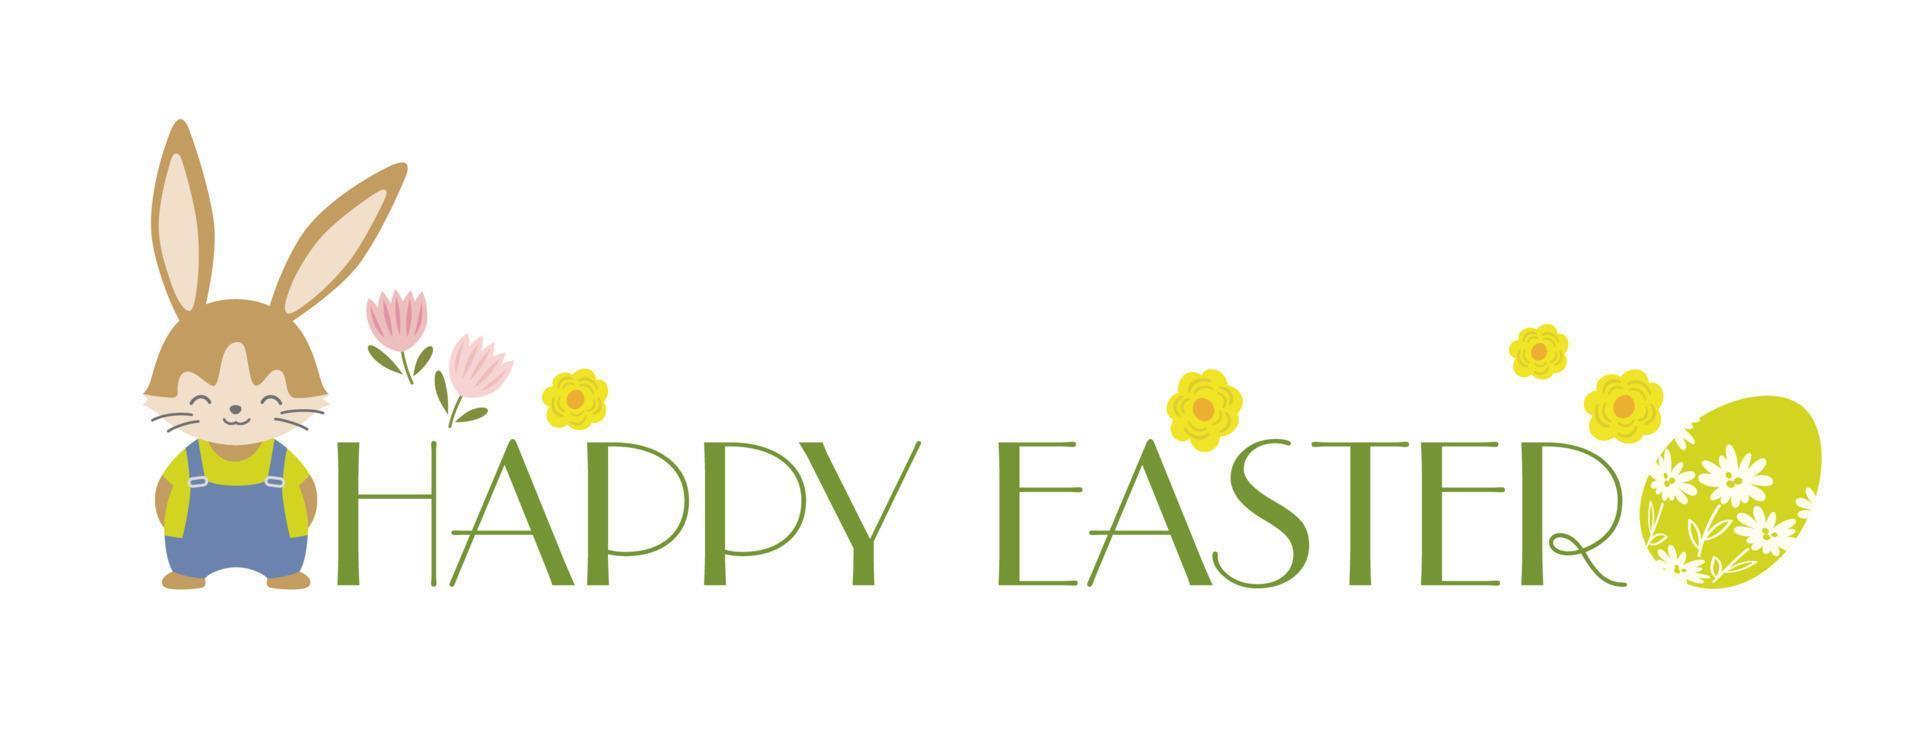 Happy Easter Vector Colorful Symbol Logo With A Cartoonish Easter Bunny And An Egg Isolated On A White Background.